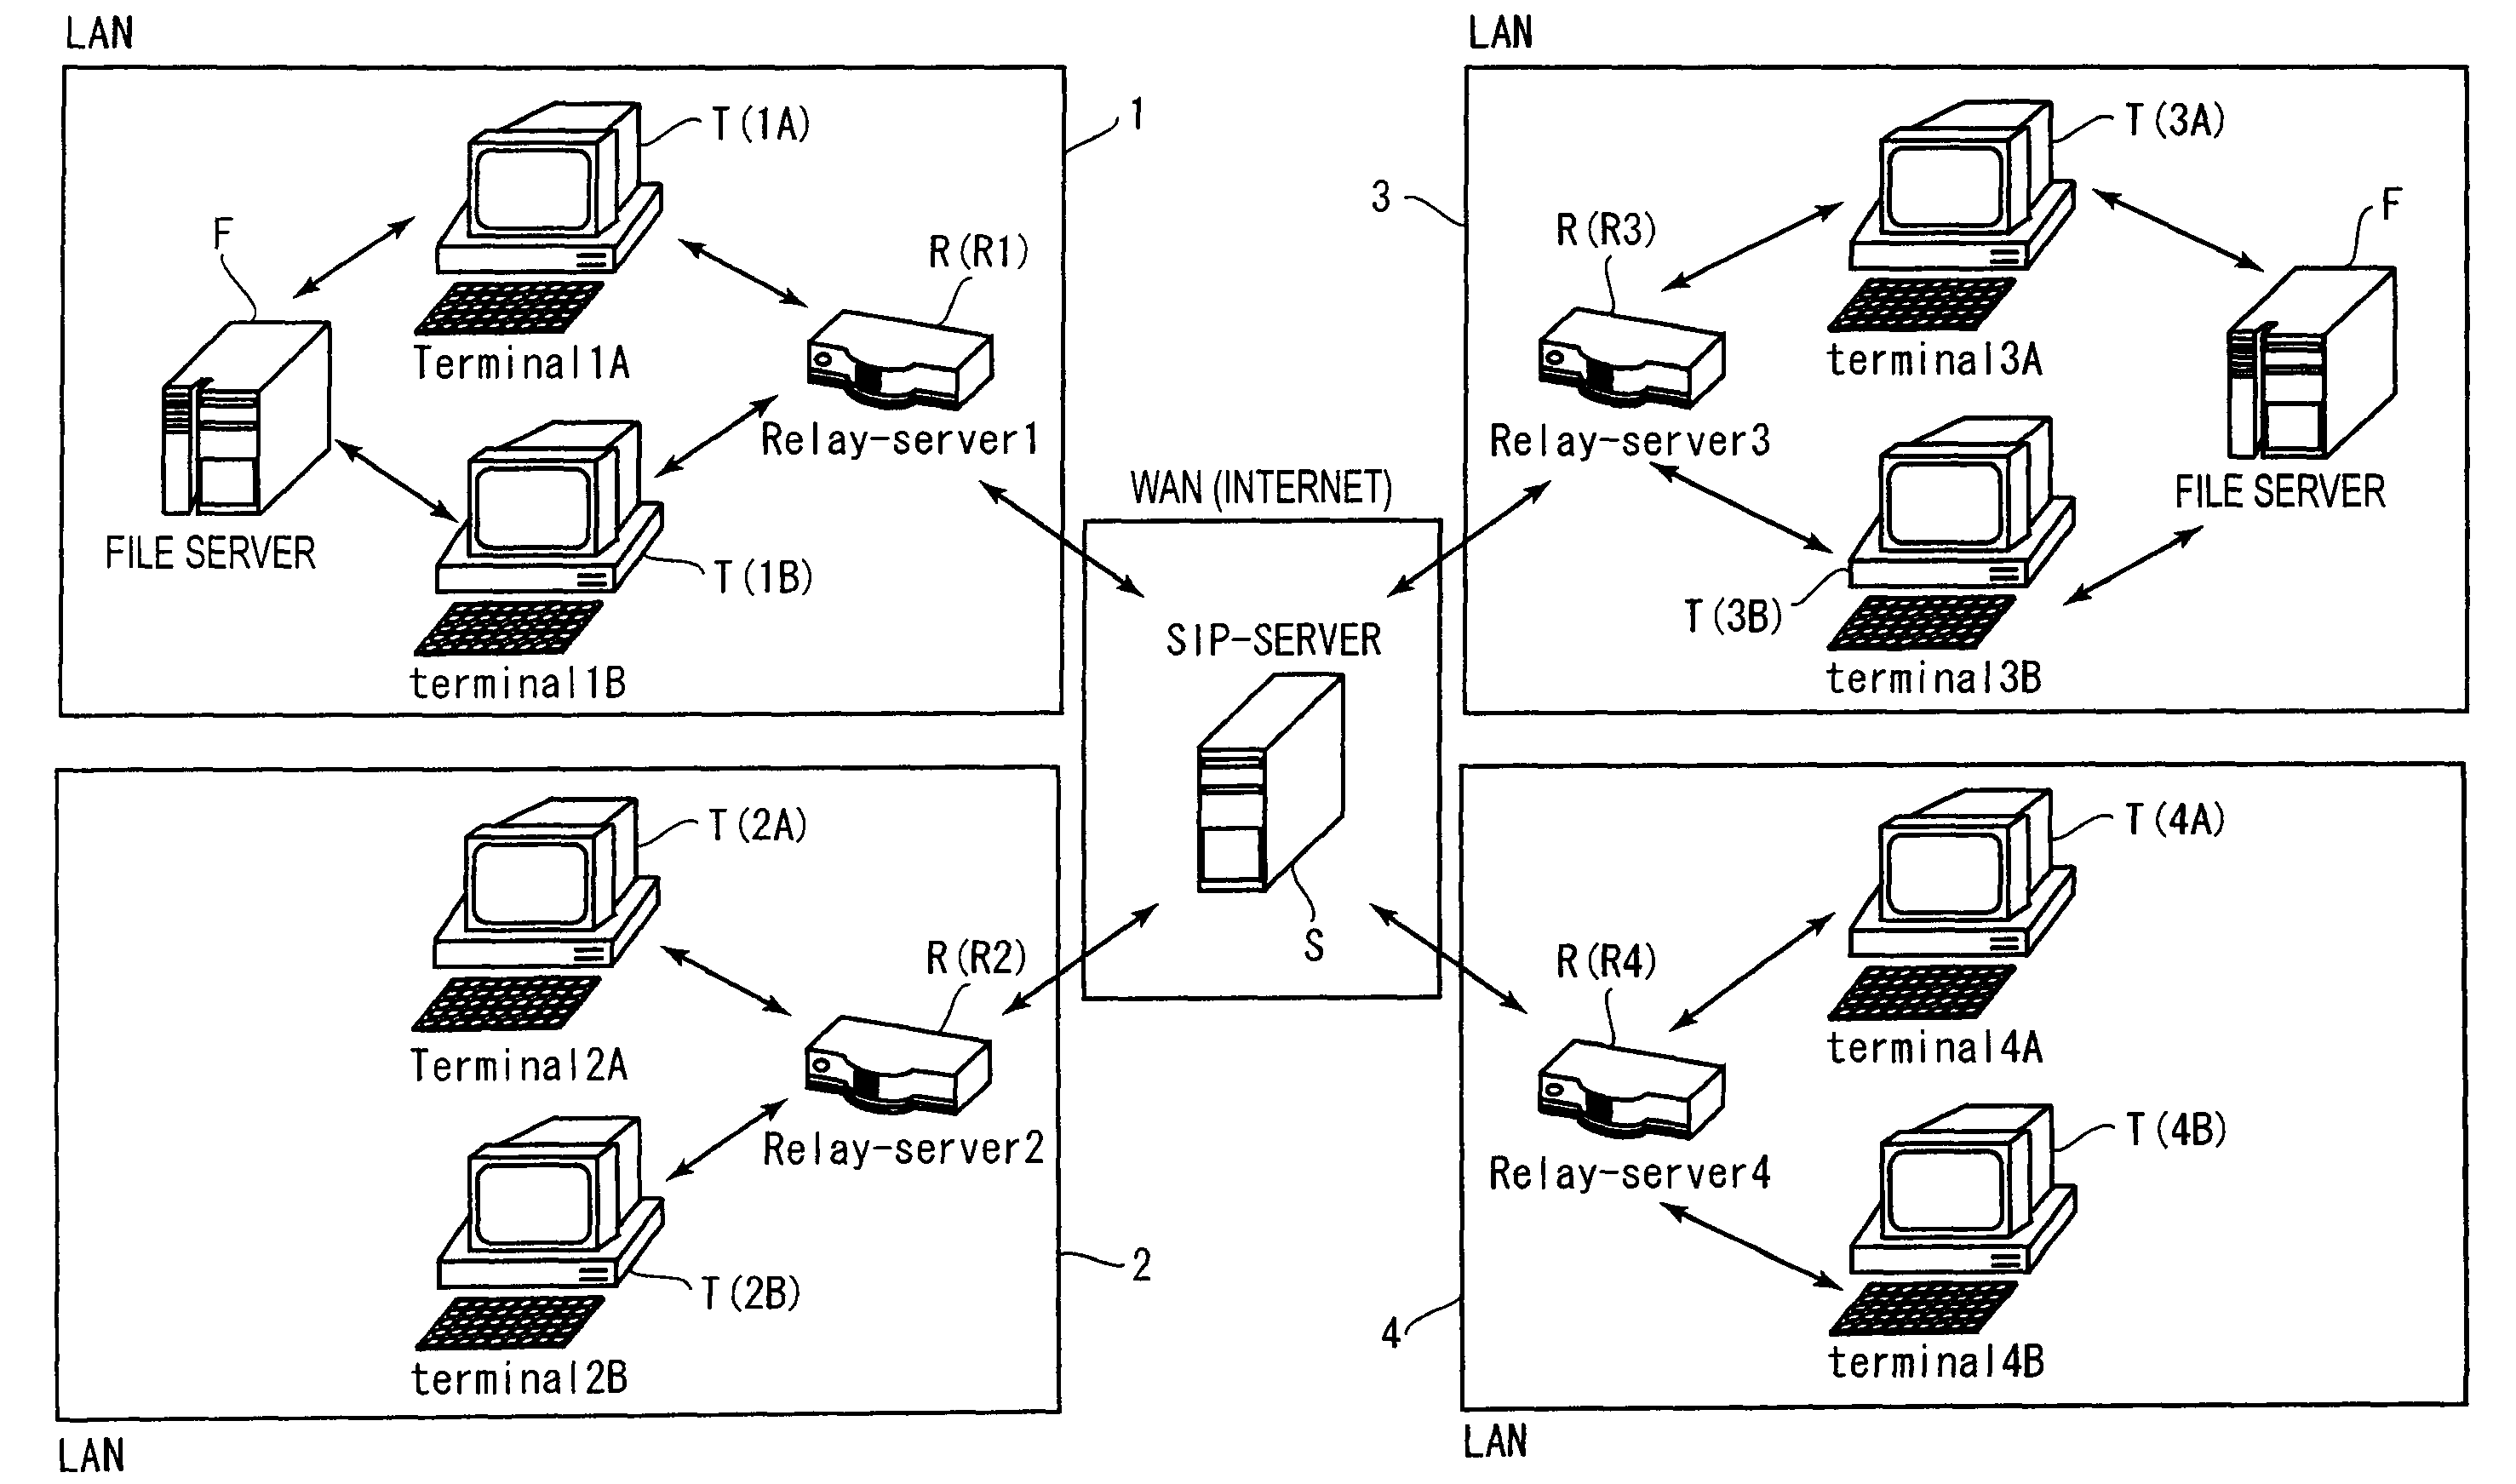 Relay server and relay communication system arranged to share resources between networks